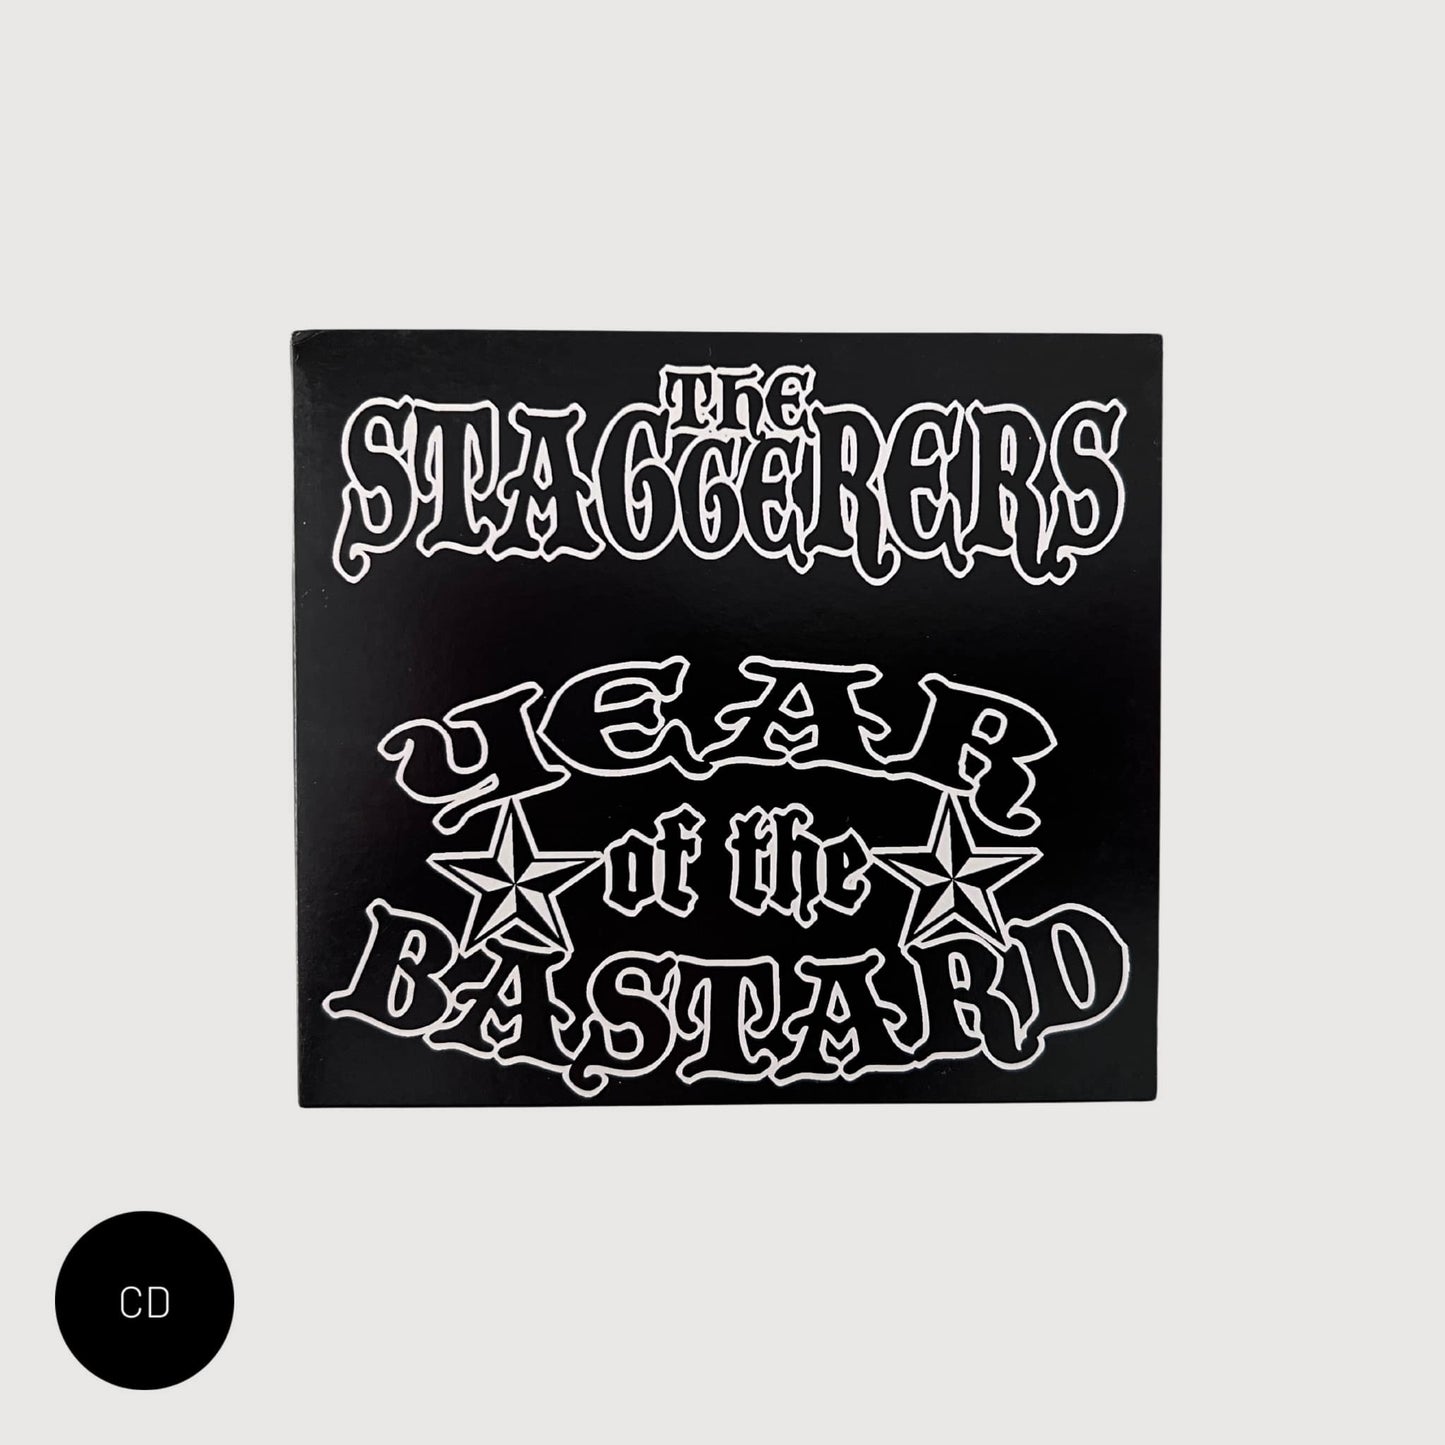 The Staggerers: Year of The Bastard CD